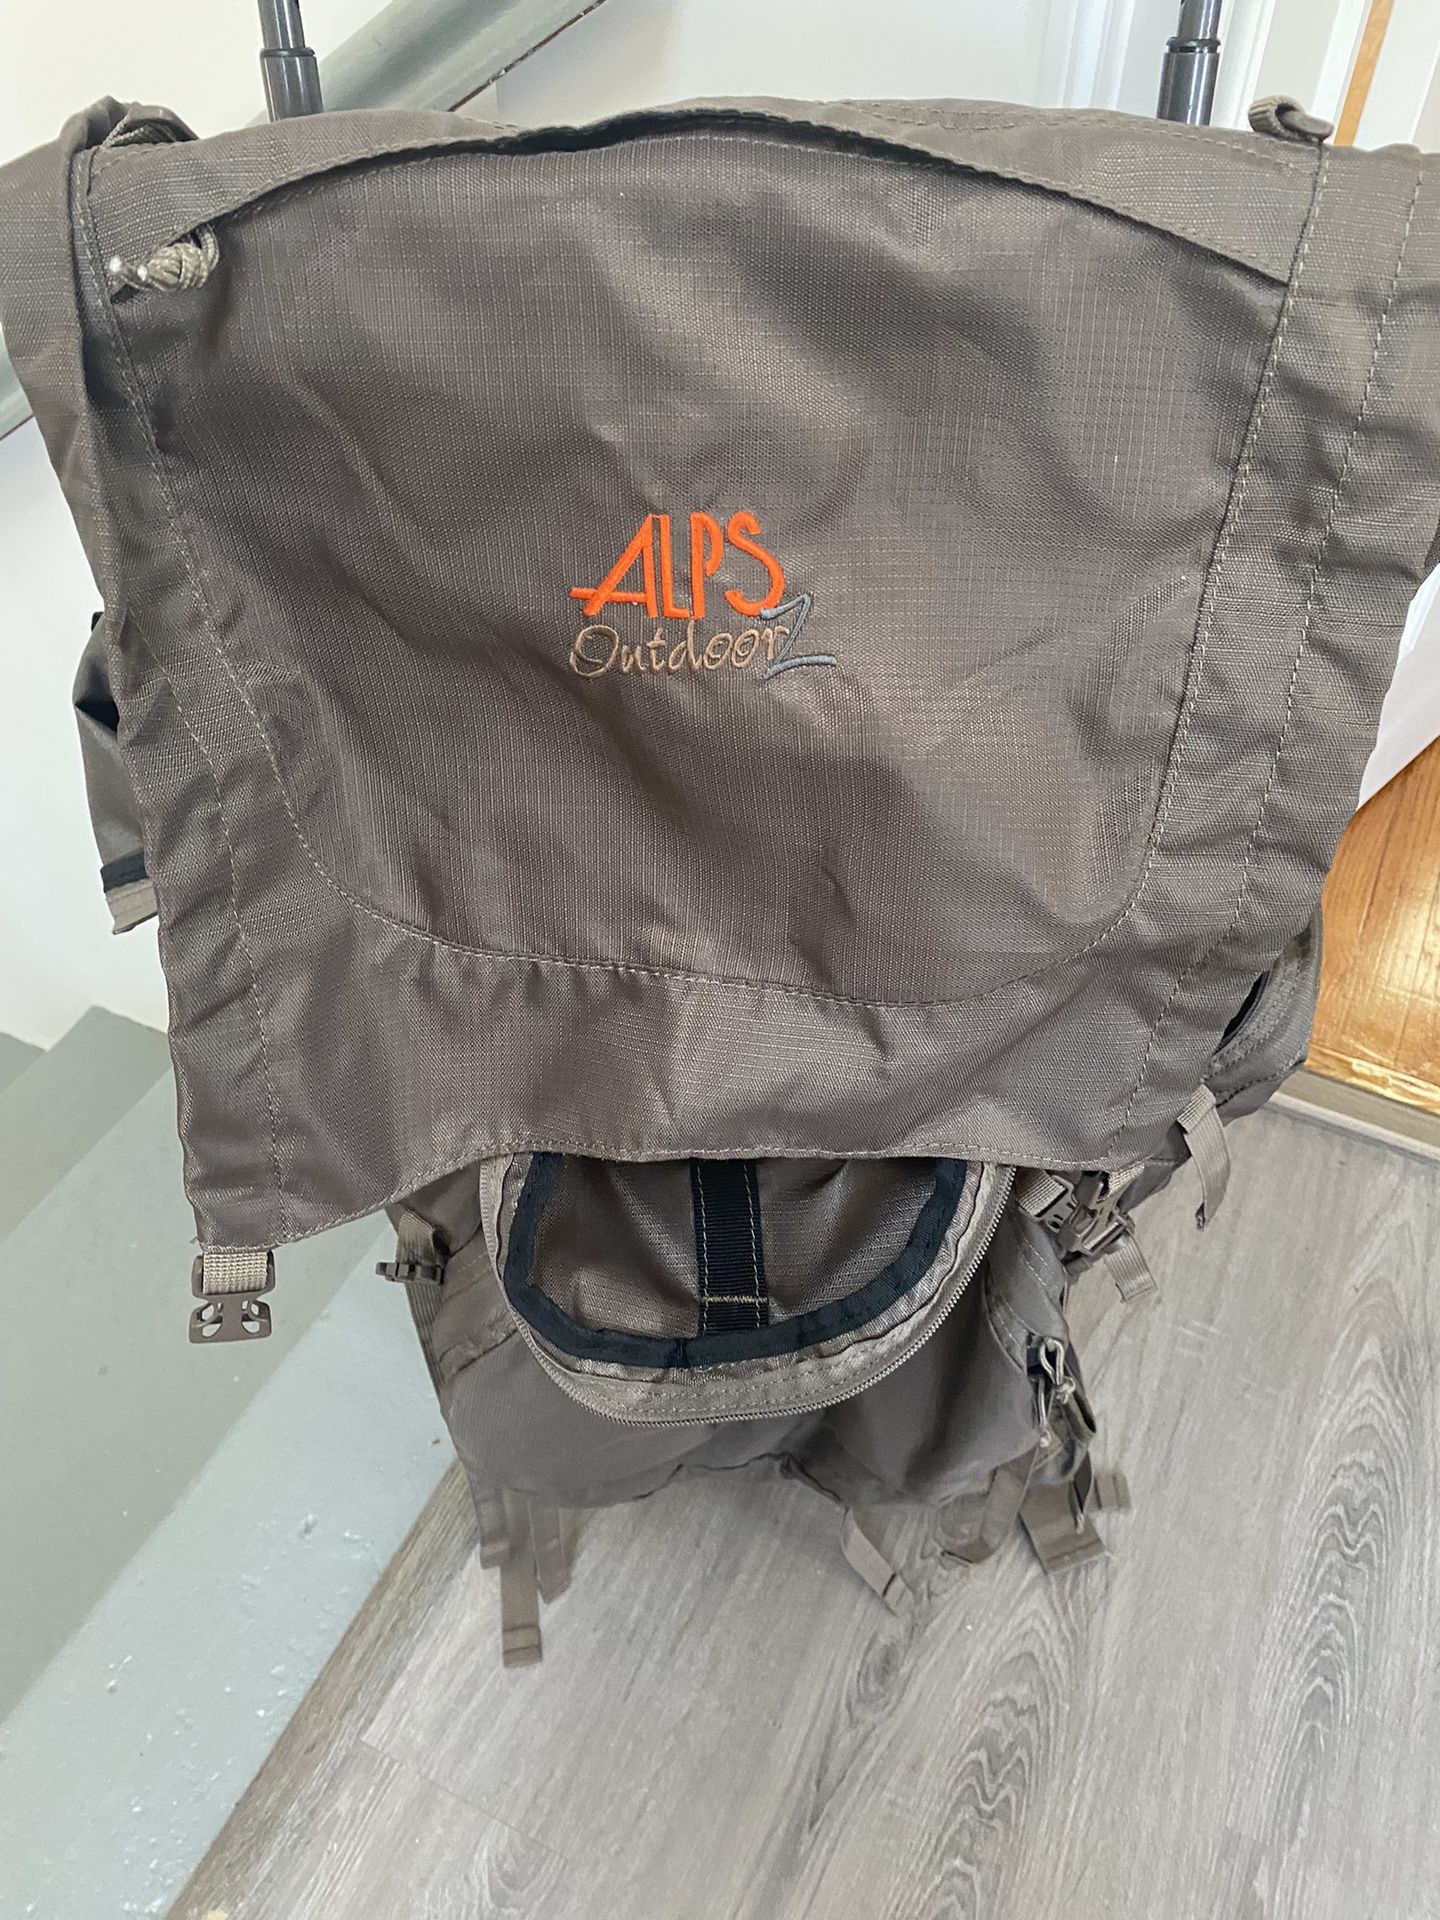 Alps Outdoors Hiking Backpack